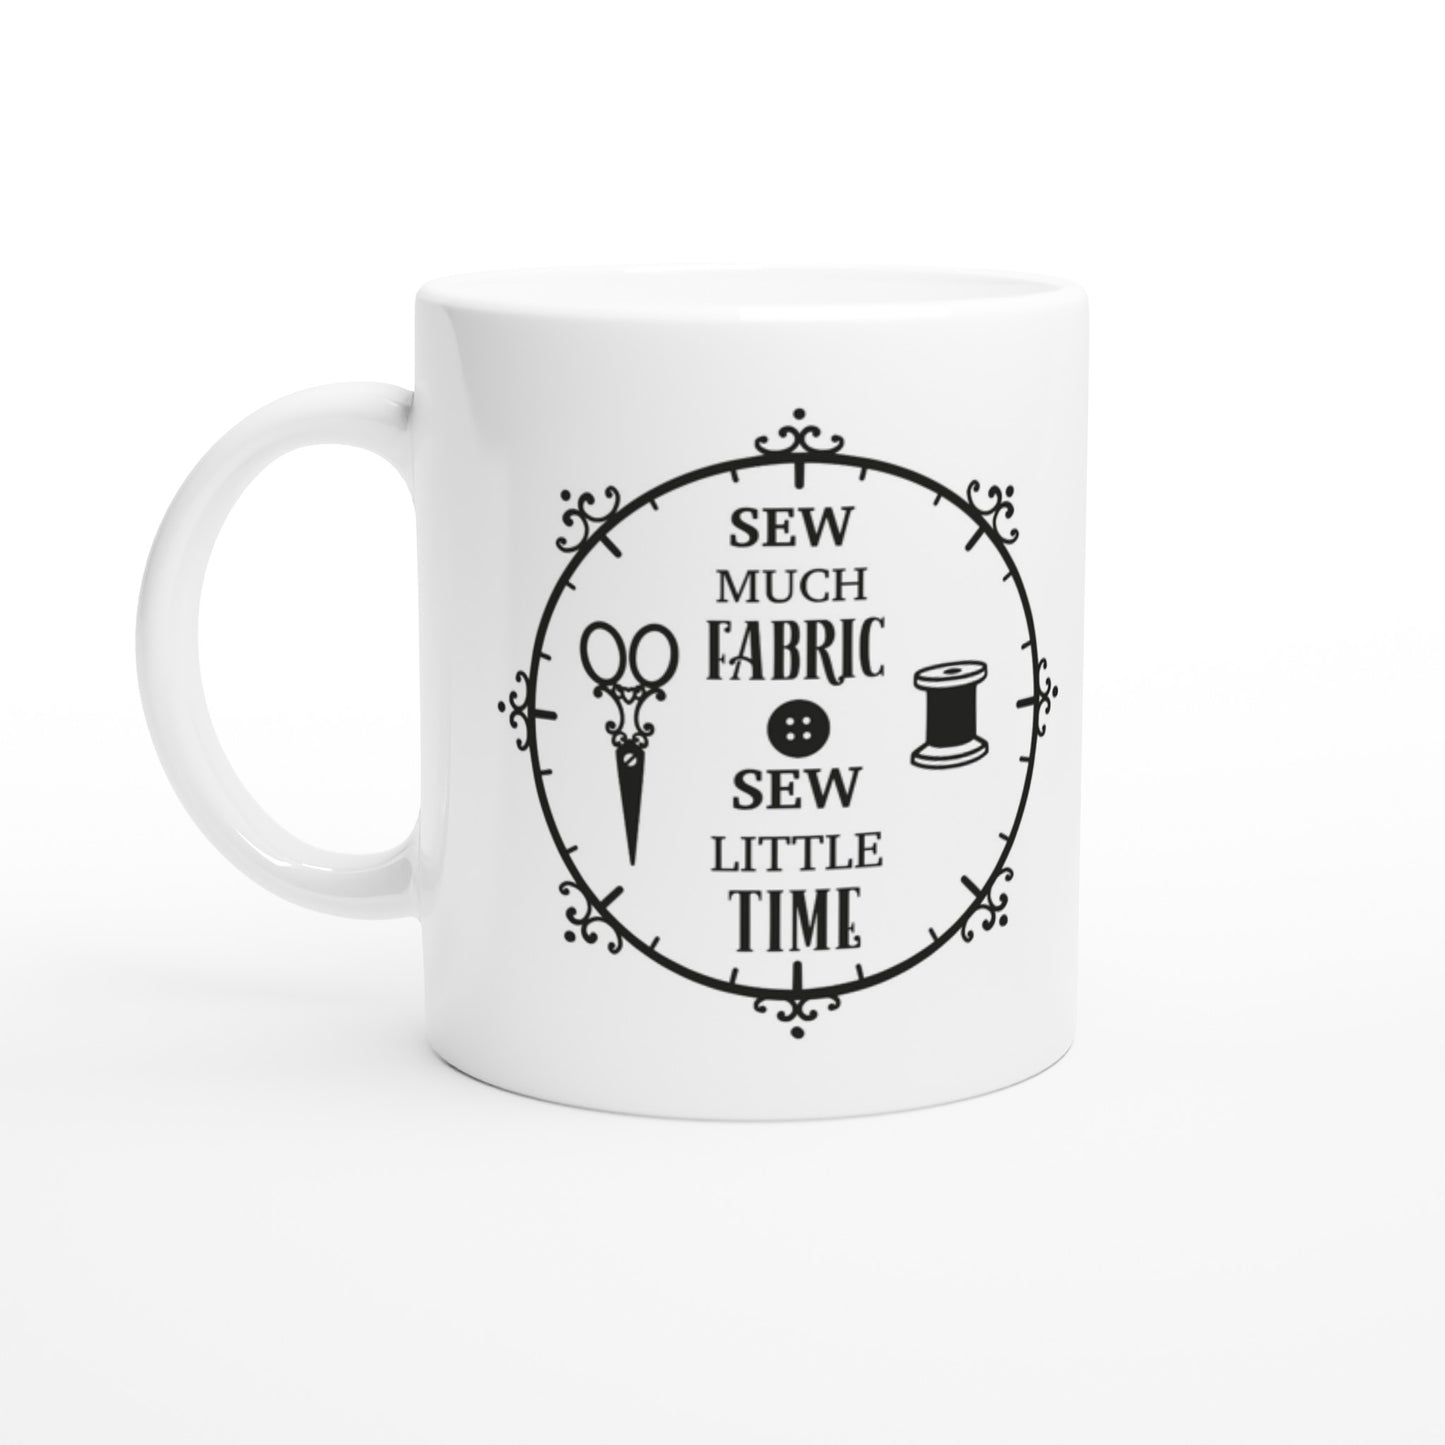 Sew Much Fabric Sew Little Time - Quilters Gift - White 11oz Ceramic Mug